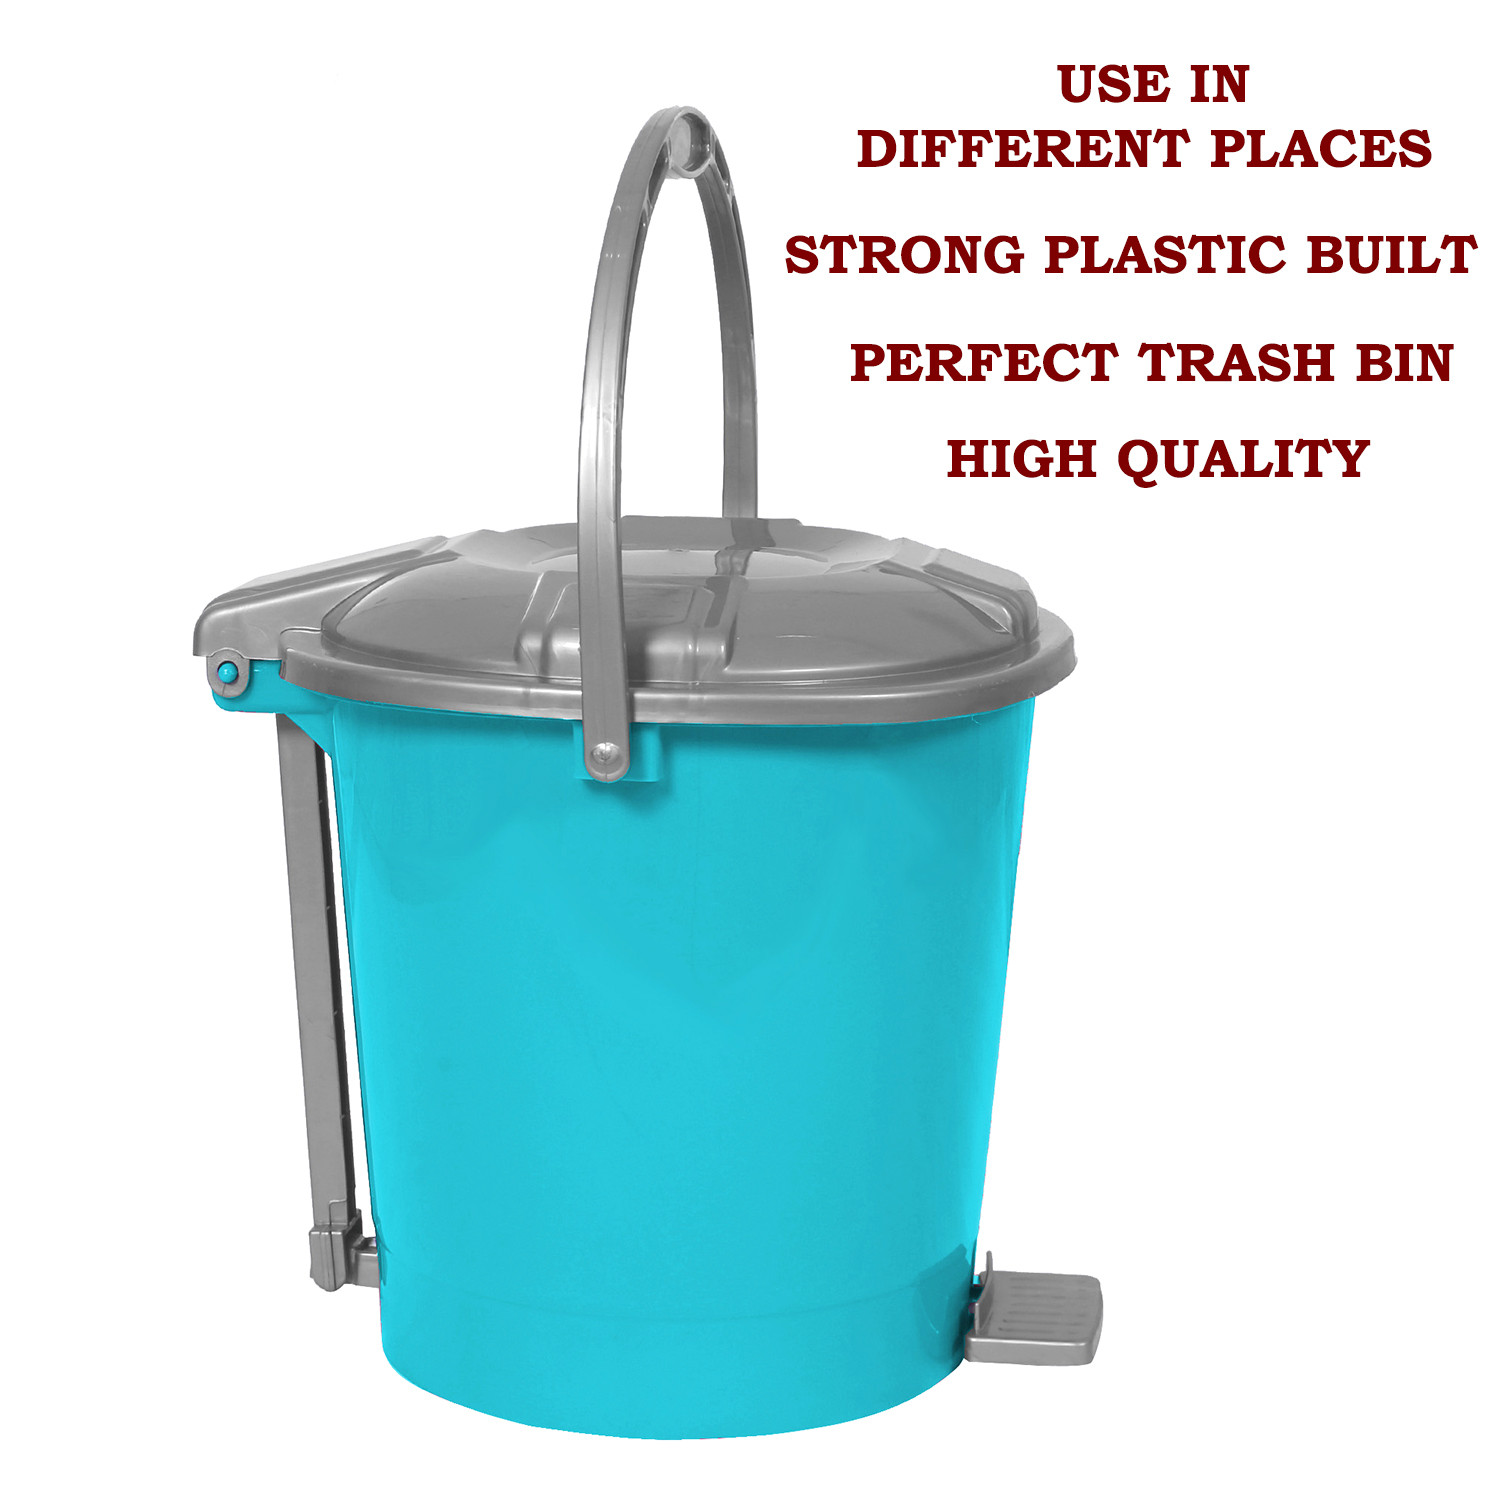 Kuber Industries Durable Plastic Pedal Dustbin|Waste Bin|Trash Can For Kitchen & Home With Handle,7 Litre,Pack of 2 (Sky Blue & Red)